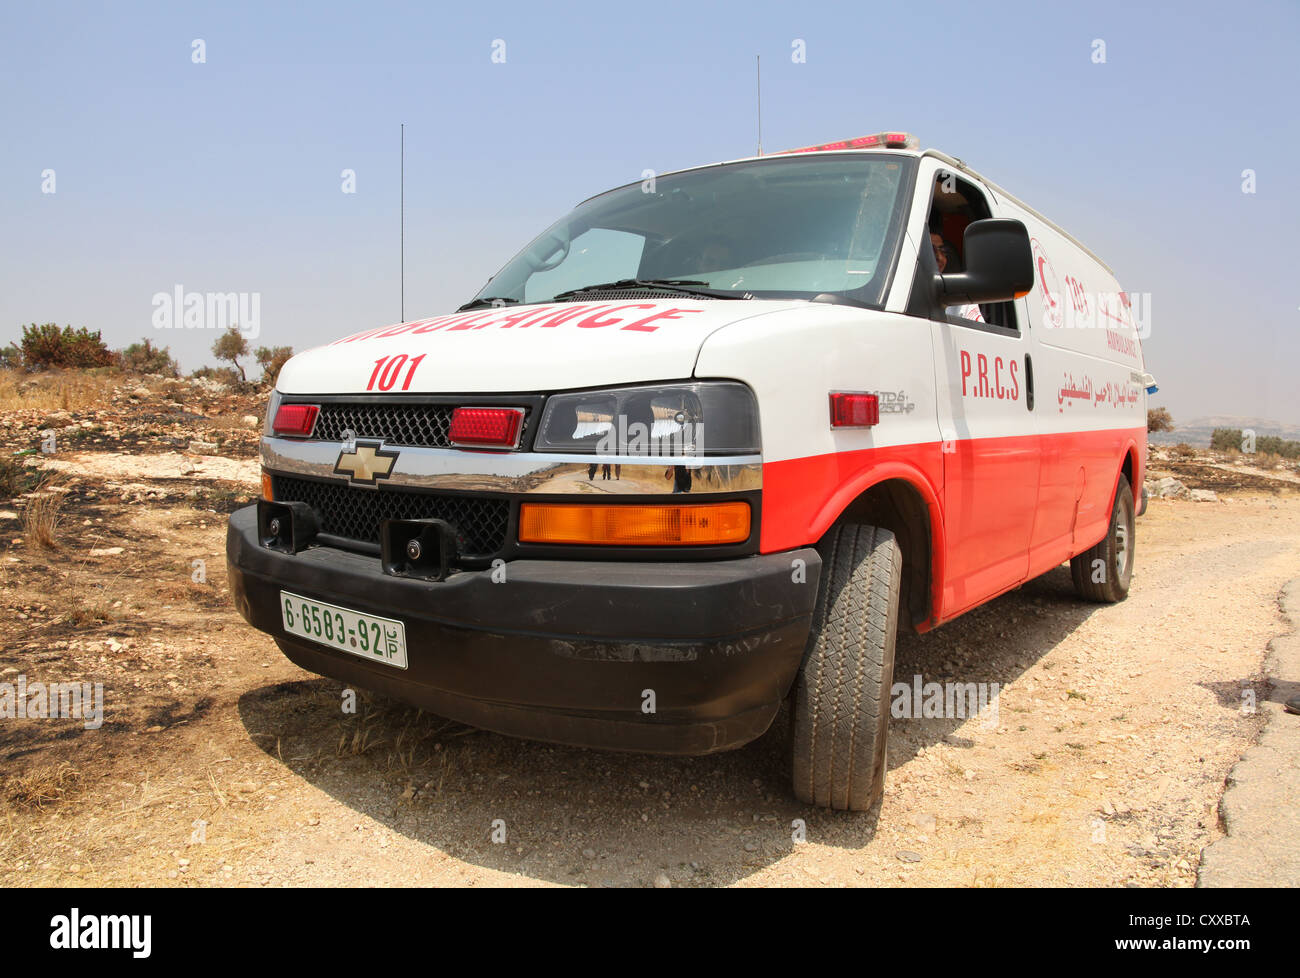 Palestinian ambulance races to an emergency at B'lin village, Occupied Palestinian Territories Stock Photo